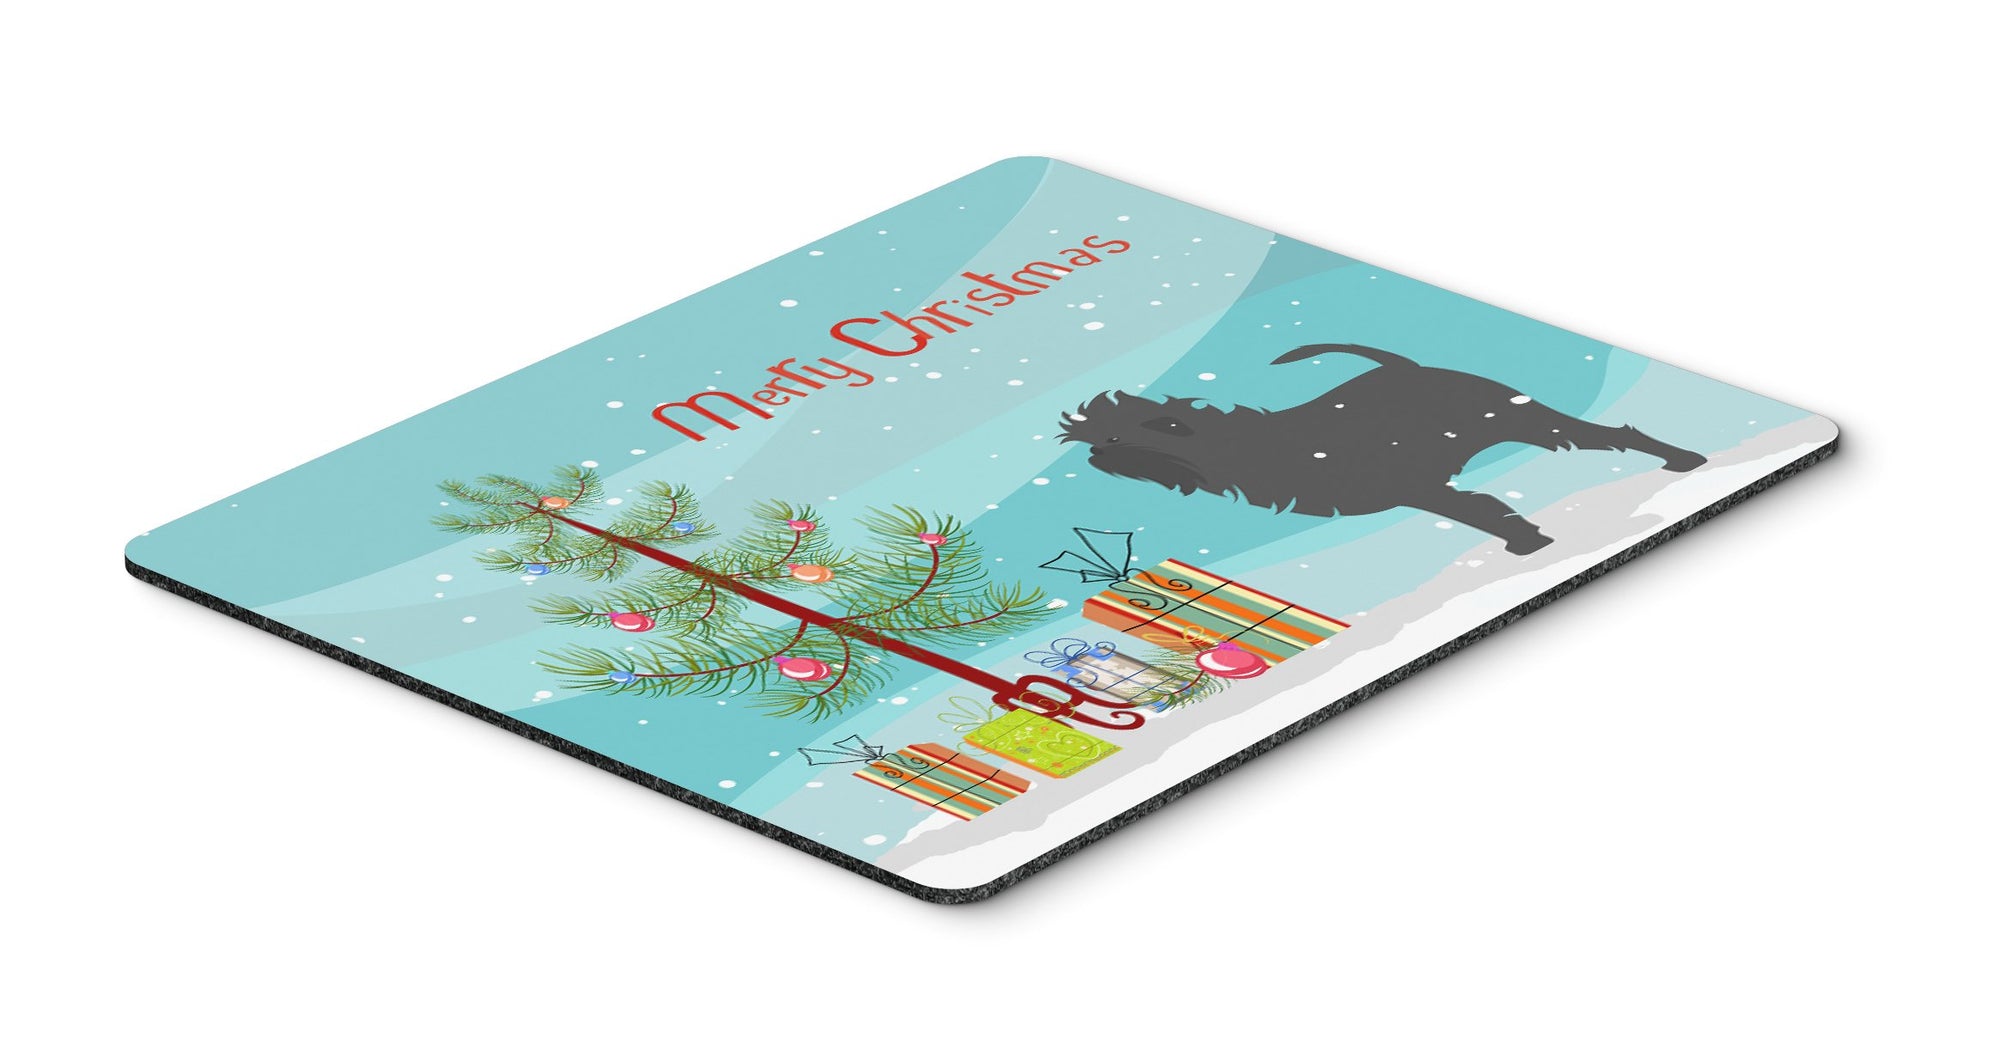 Affenpinscher Merry Christmas Tree Mouse Pad, Hot Pad or Trivet by Caroline's Treasures